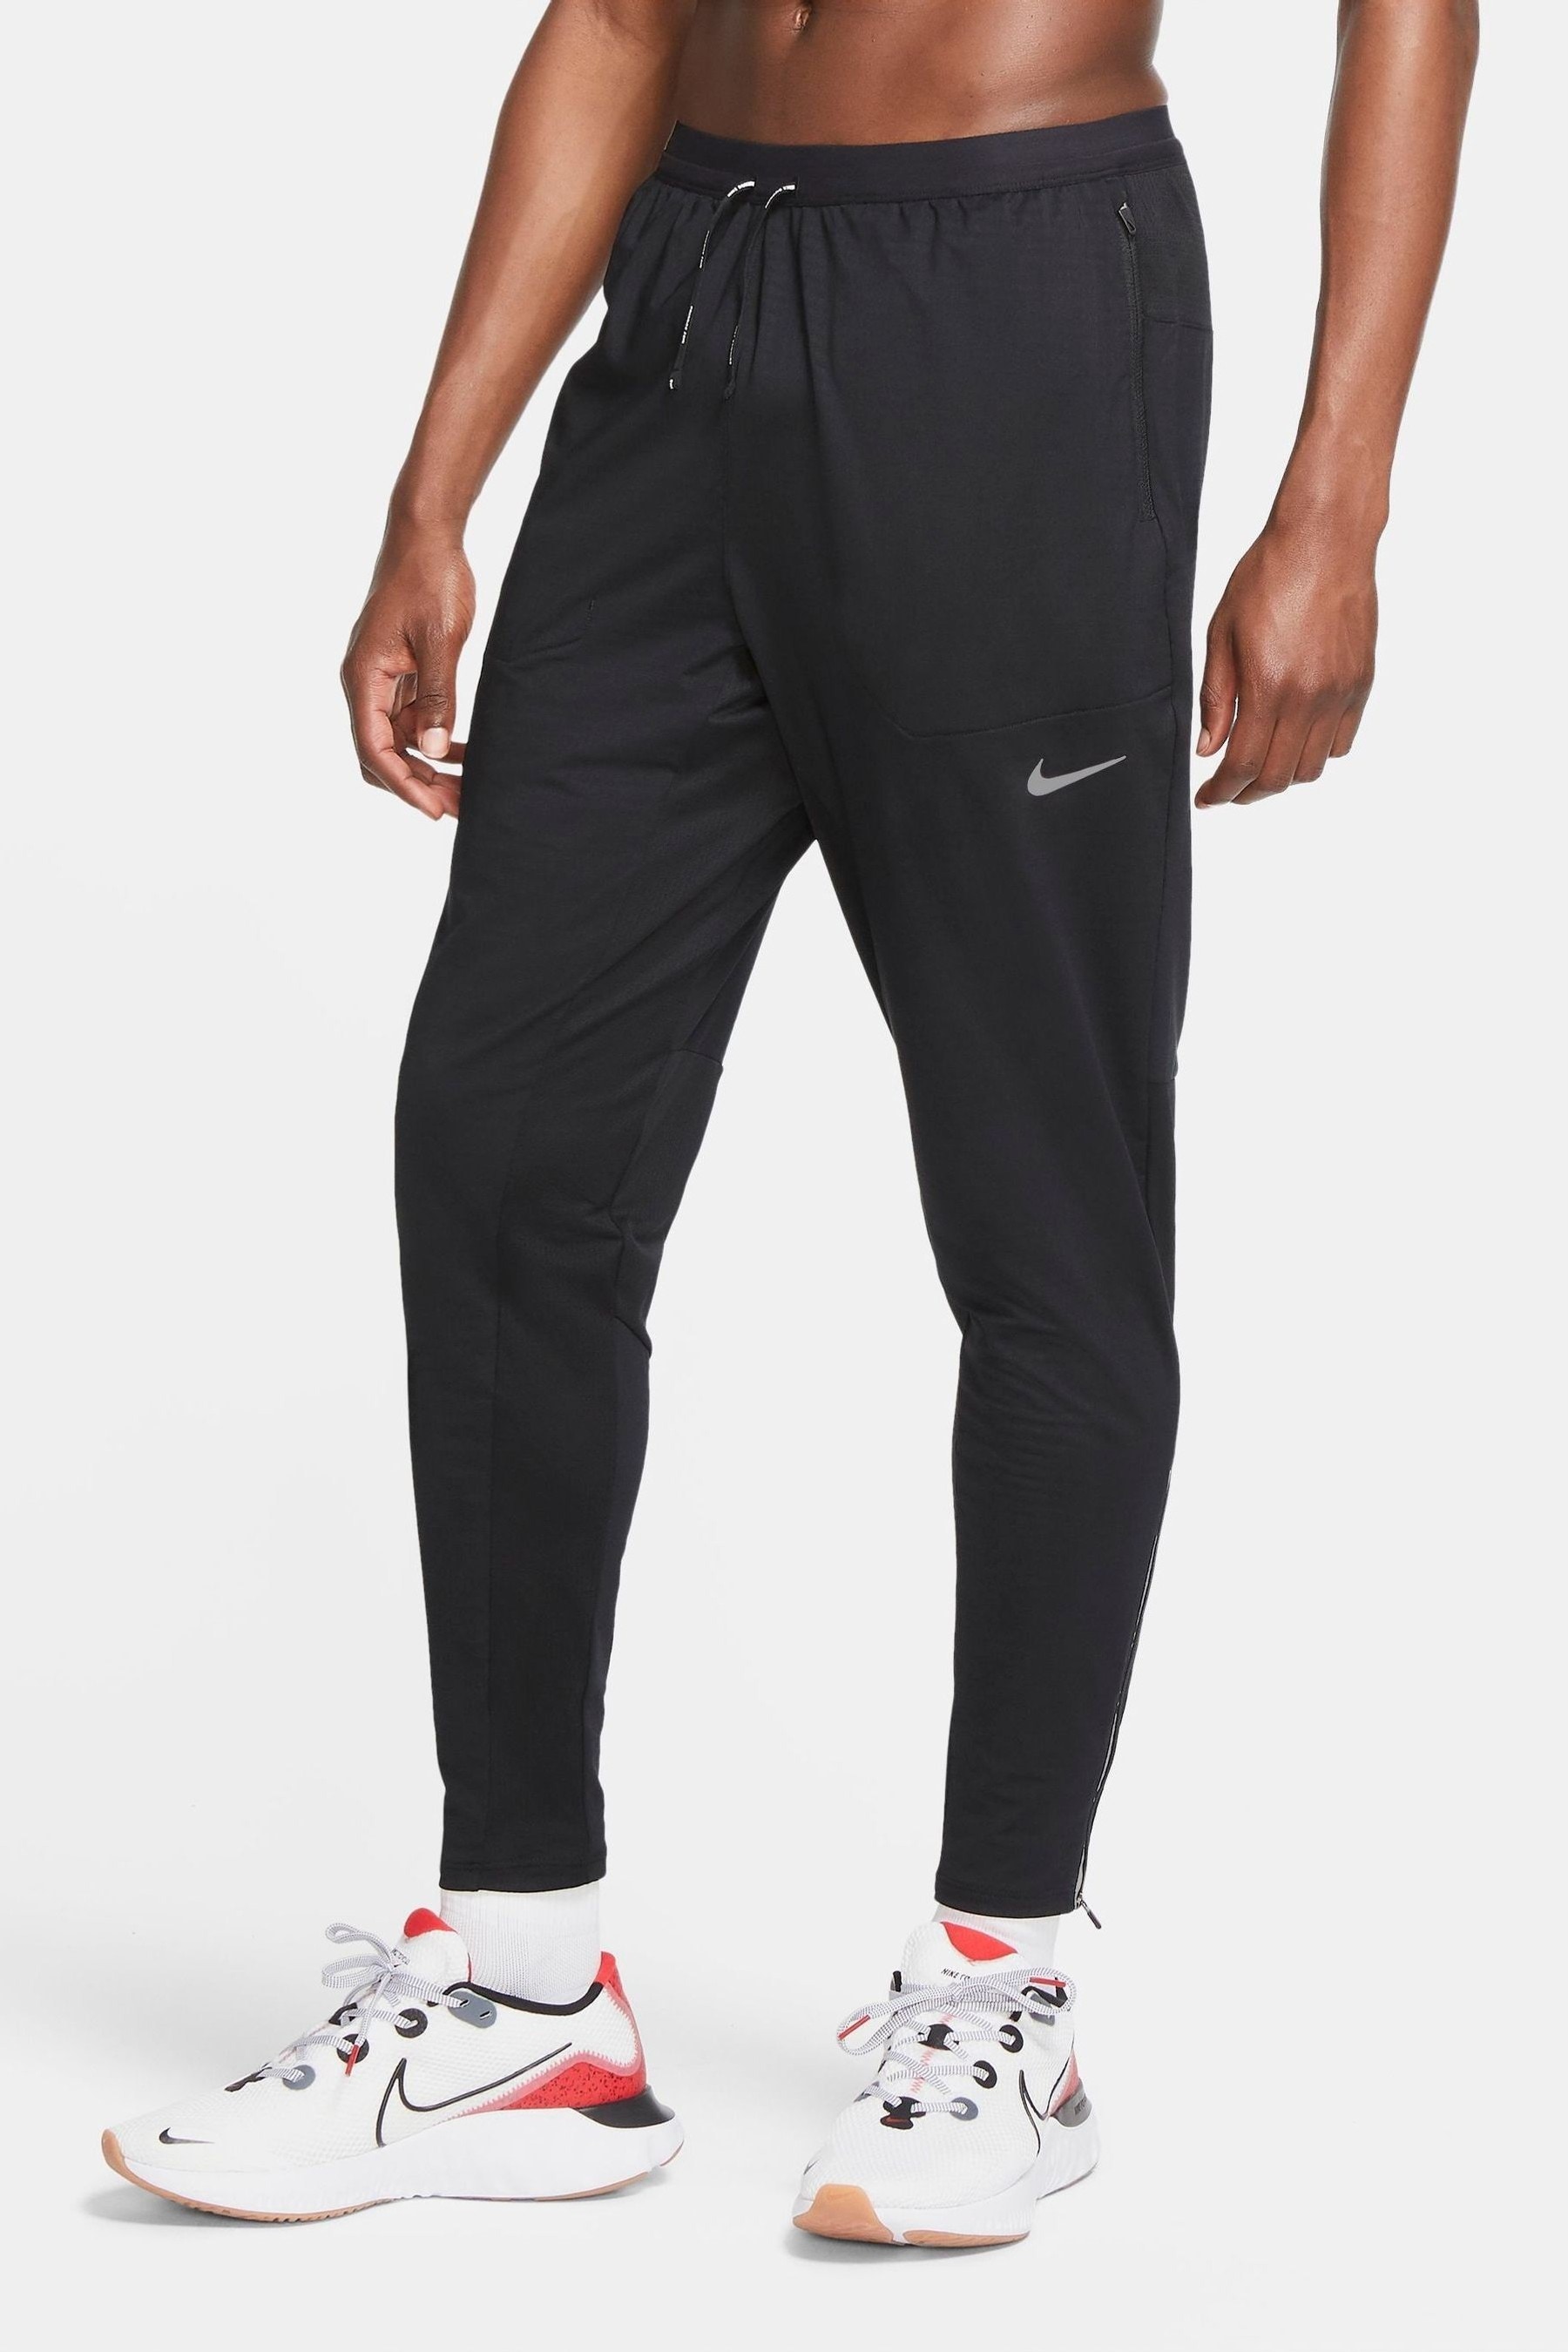 Buy Nike Phenom Elite Joggers from the 